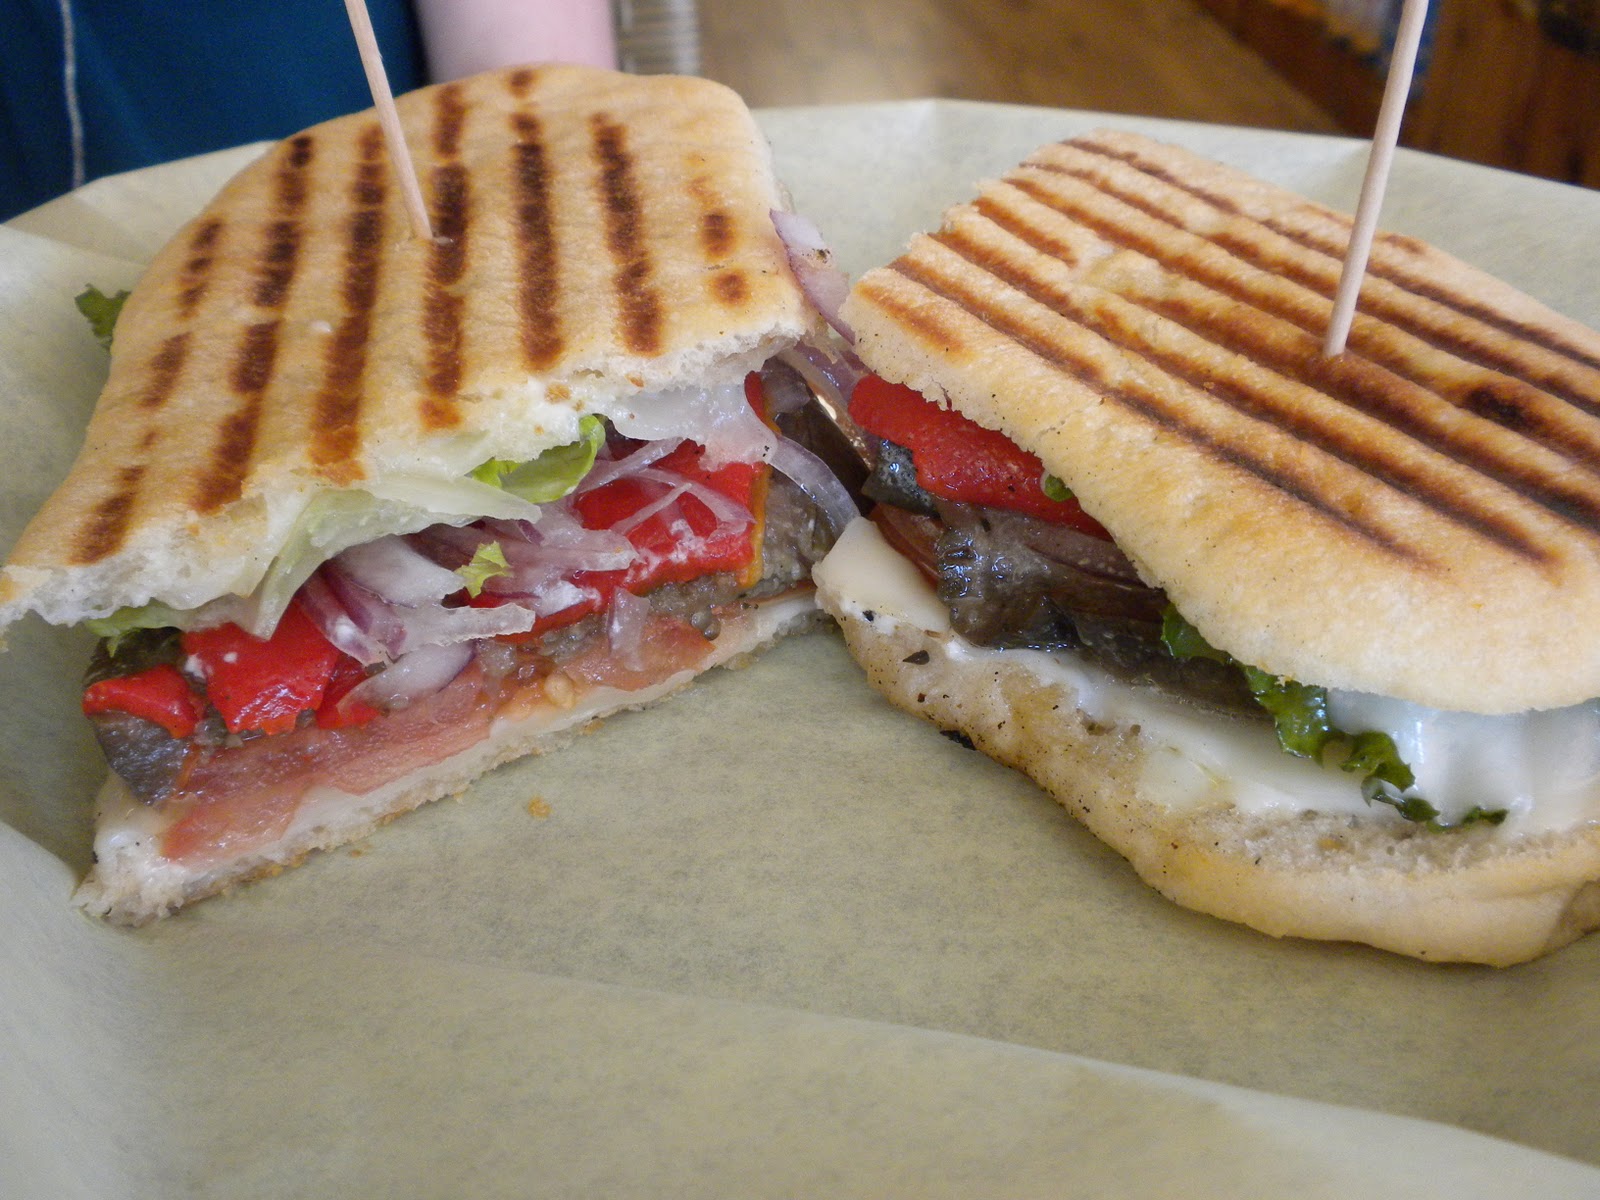 The vegetarian panini with eggplant, sweet roasted red peppers, and cheese ...